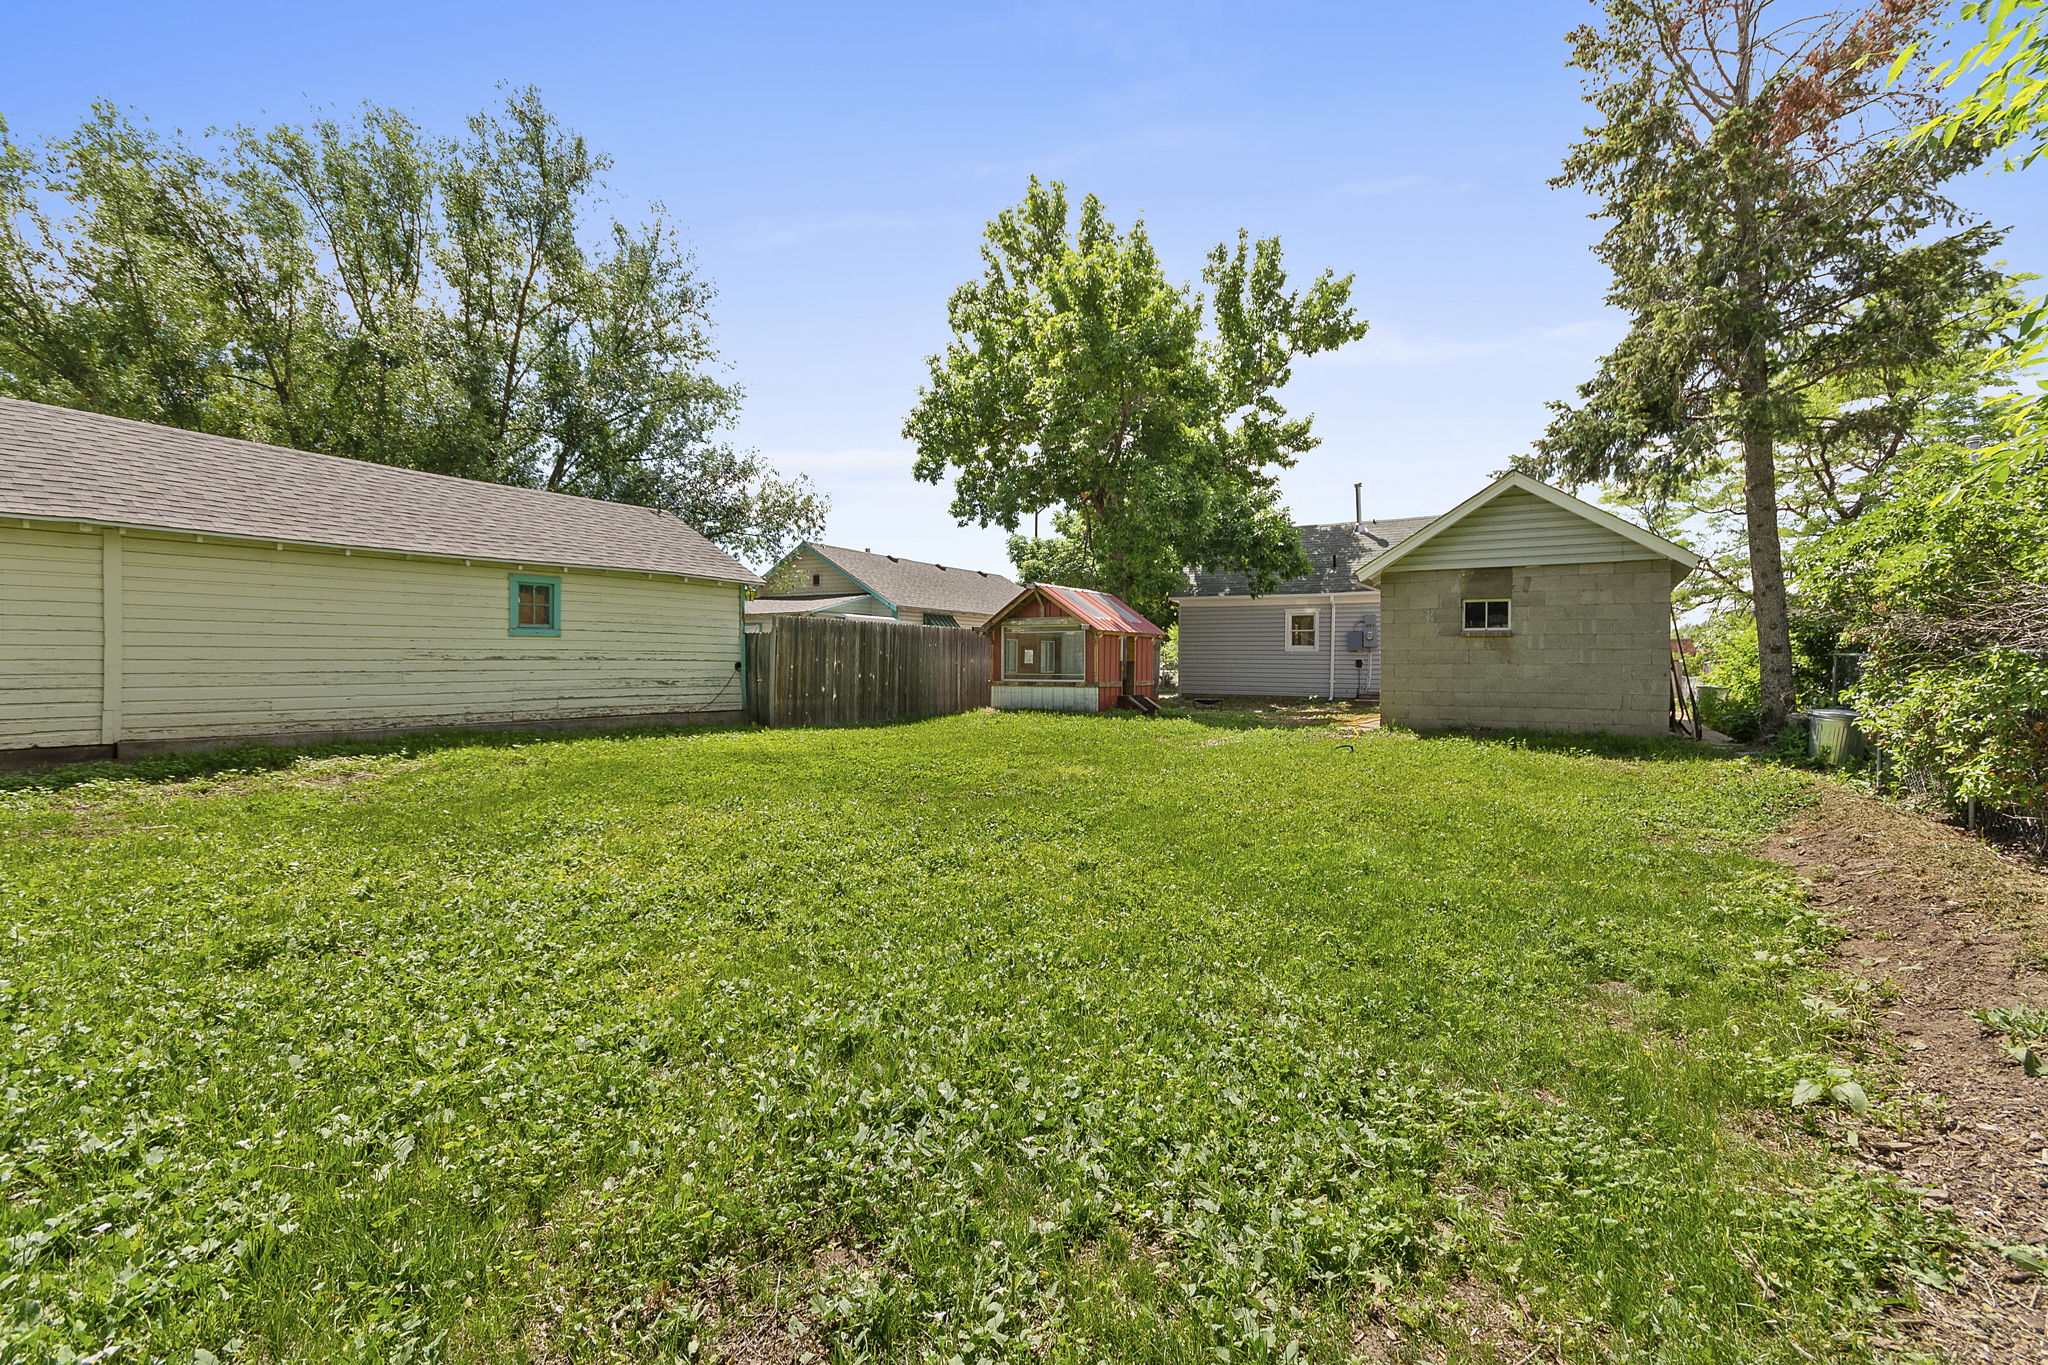  216 Lincoln St, Fort Collins, CO 80524, US Photo 22